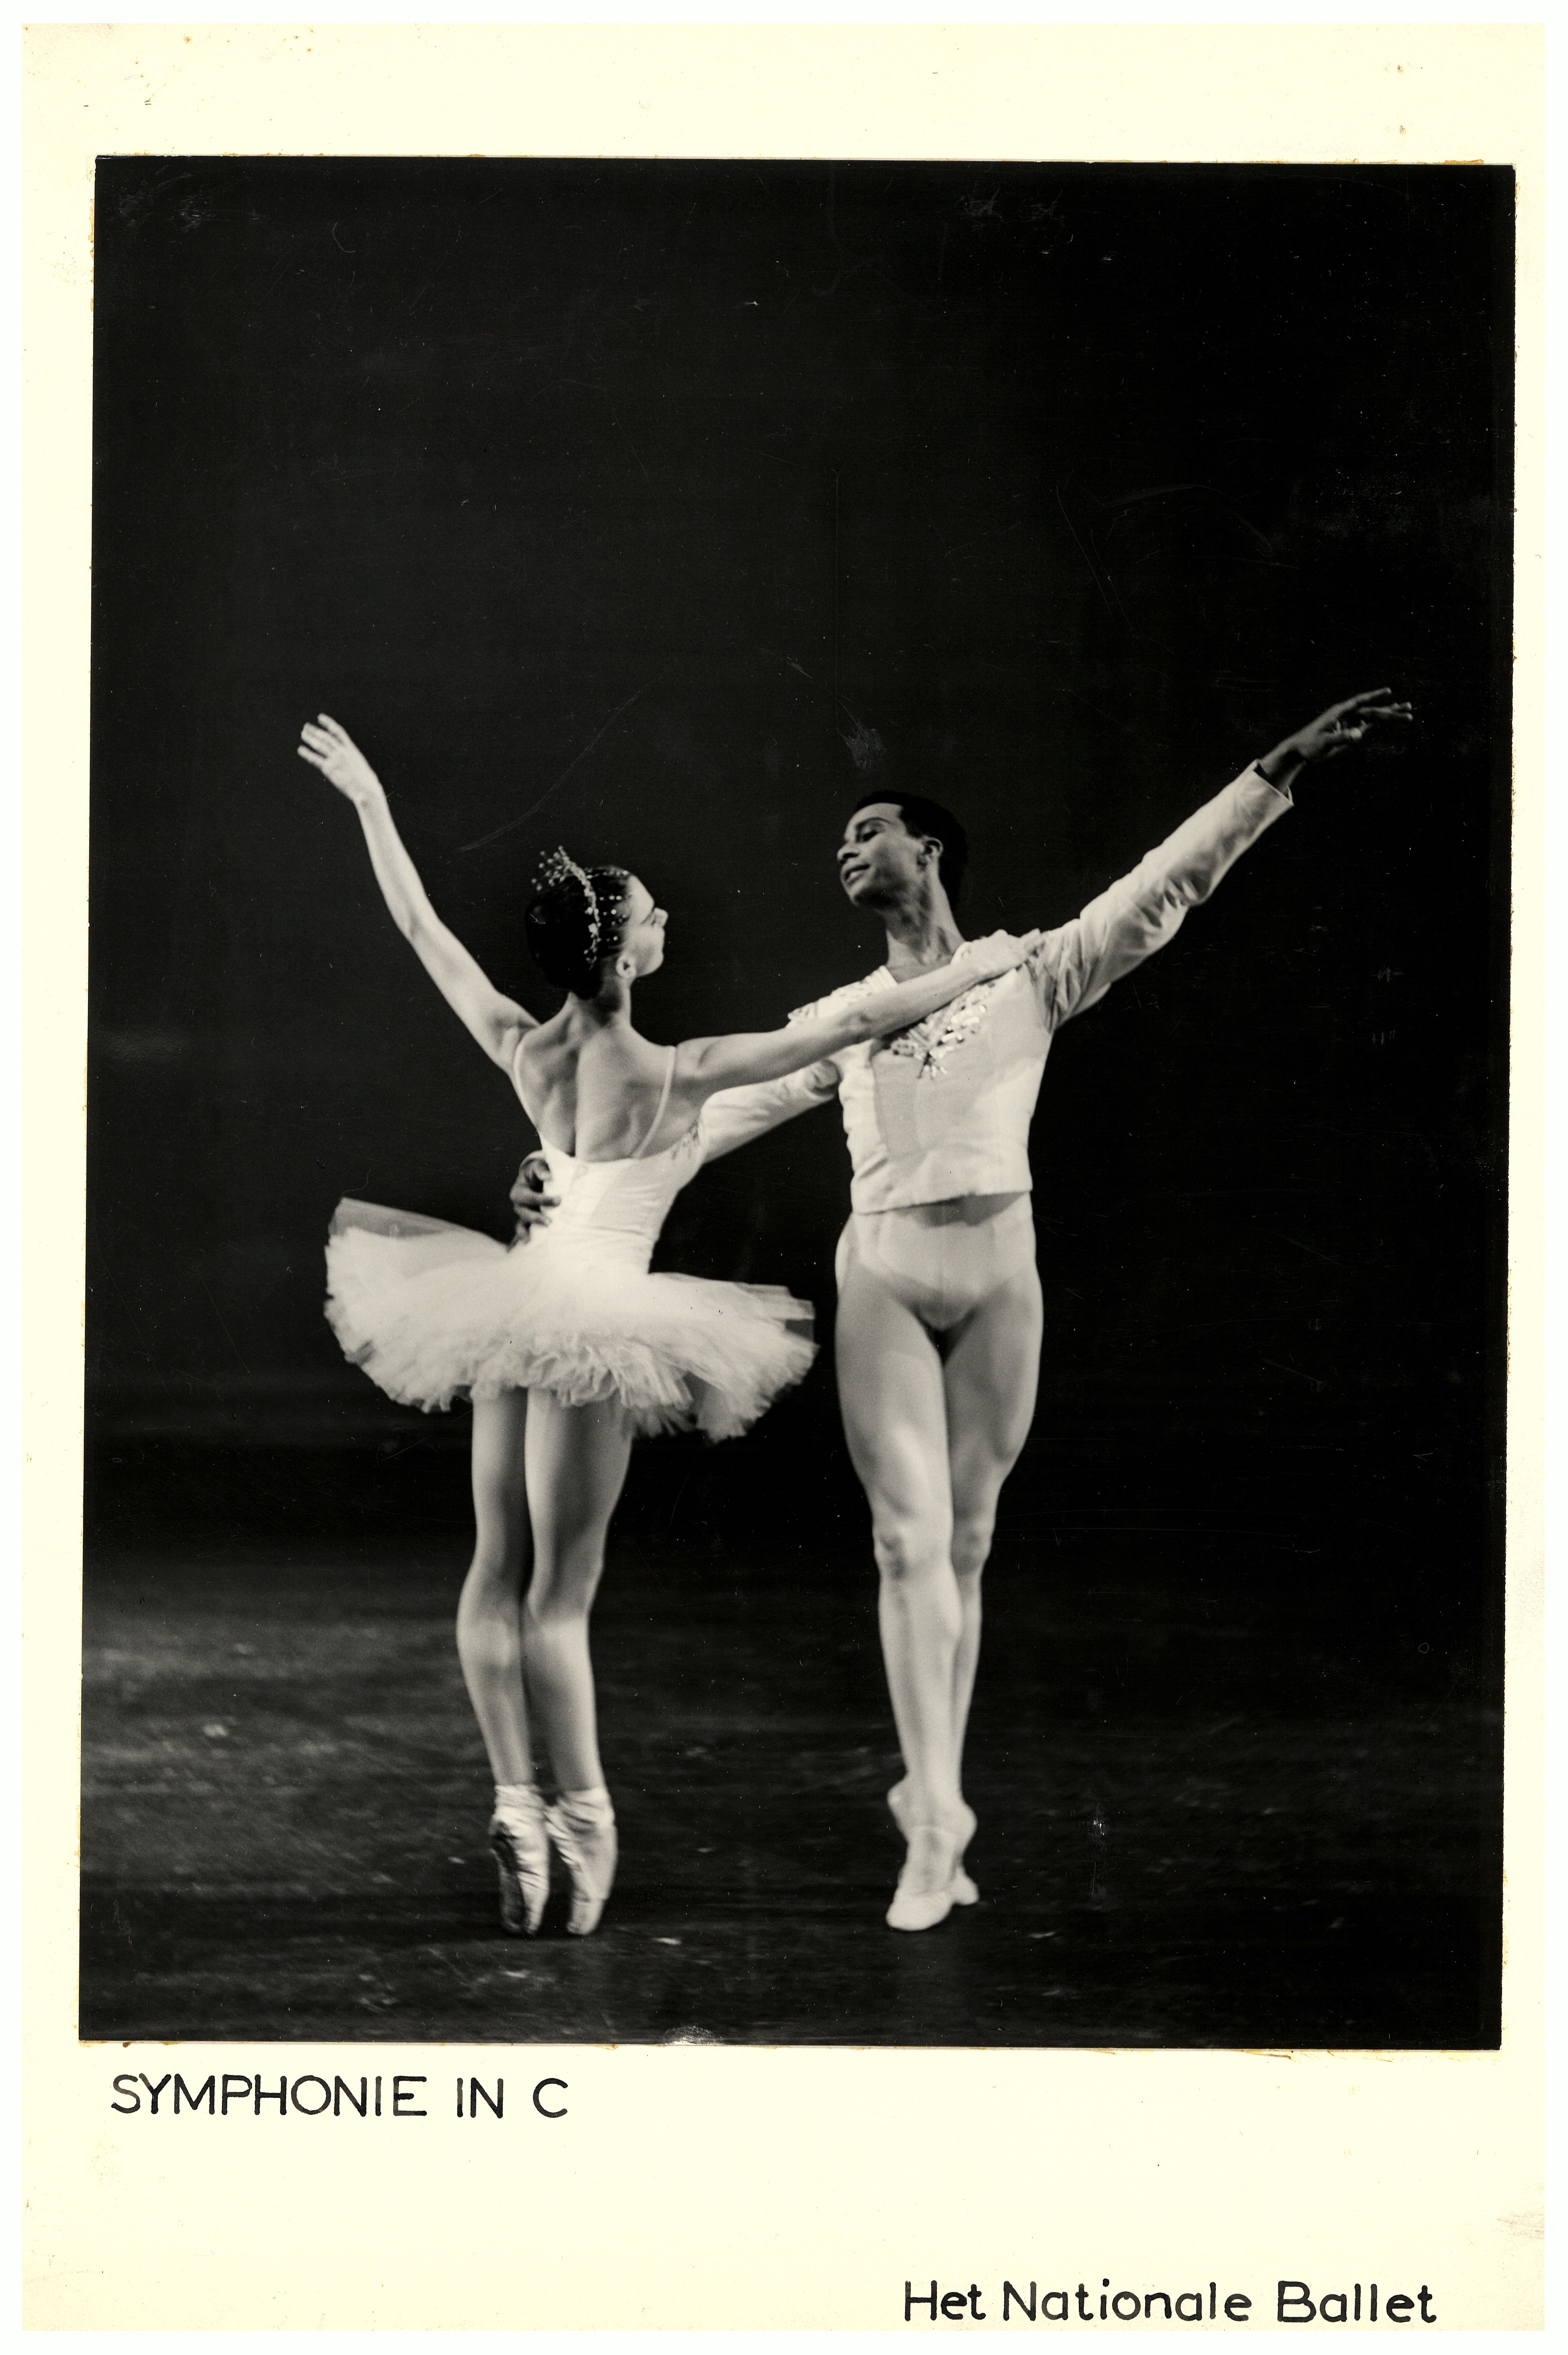 1961 – The Capitol Ballet Company is founded in Washington DC